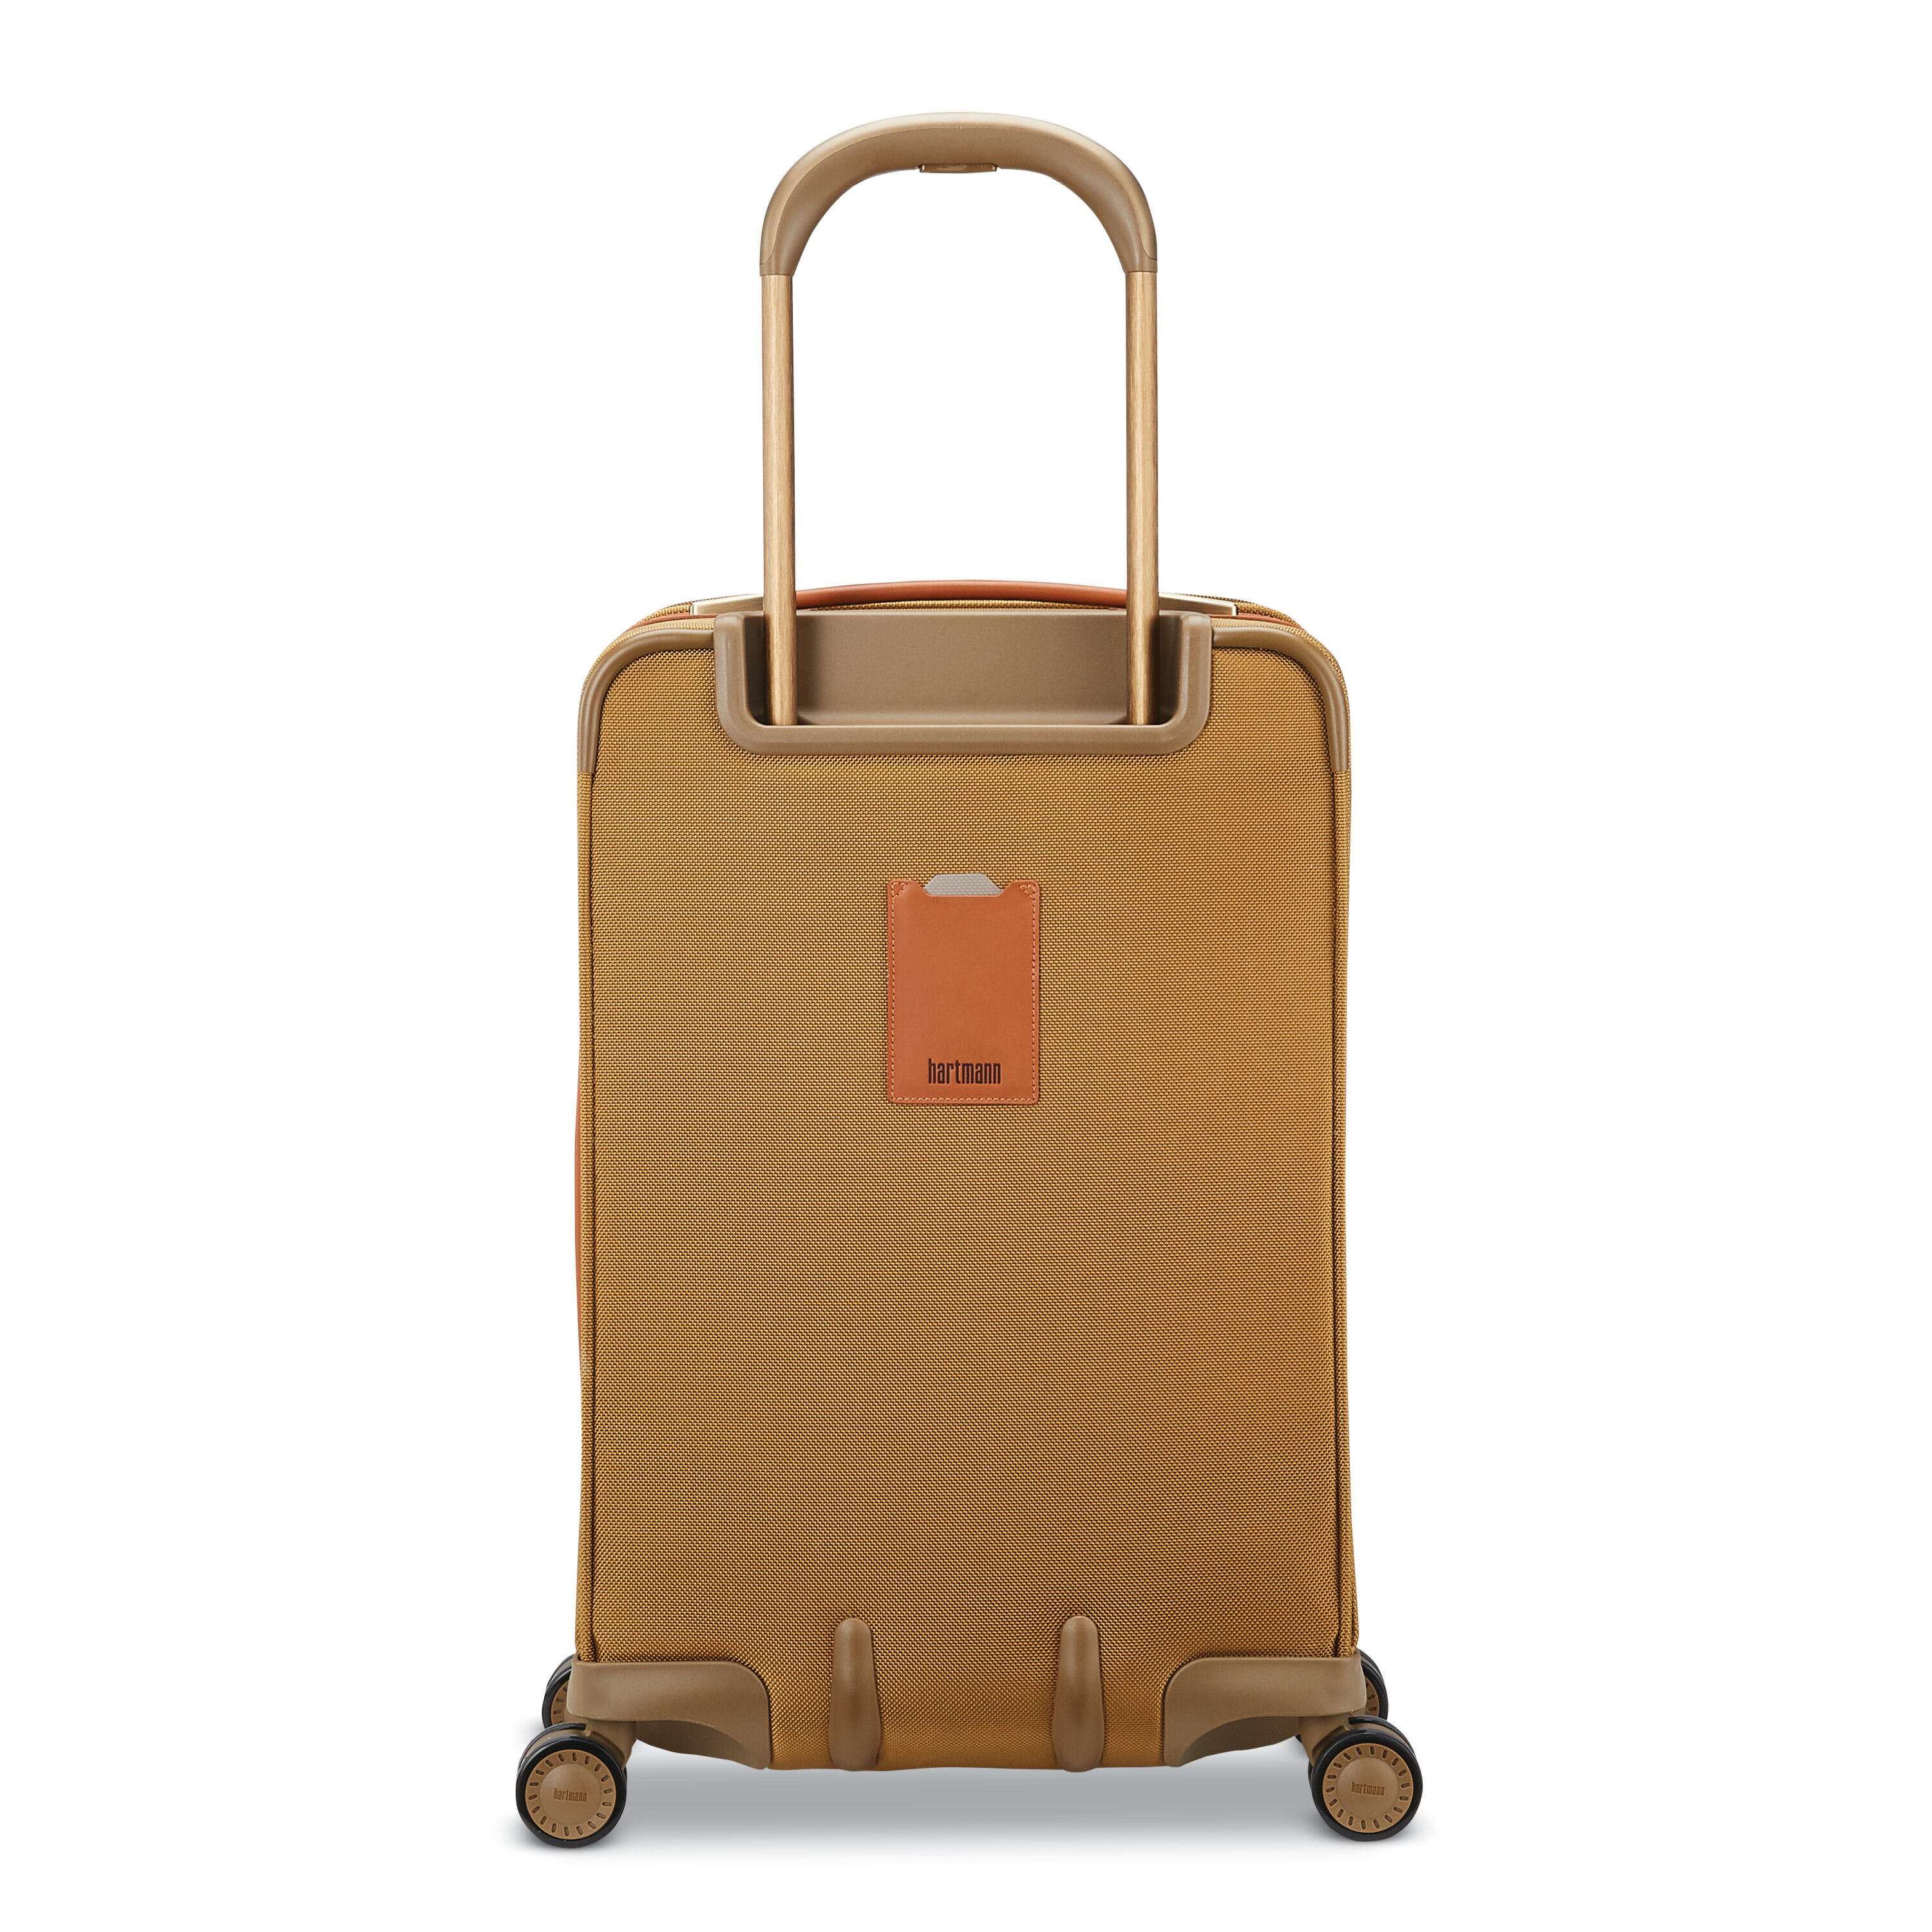 Buy Ratio Classic Deluxe 2 Global Carry-On for USD 580.00